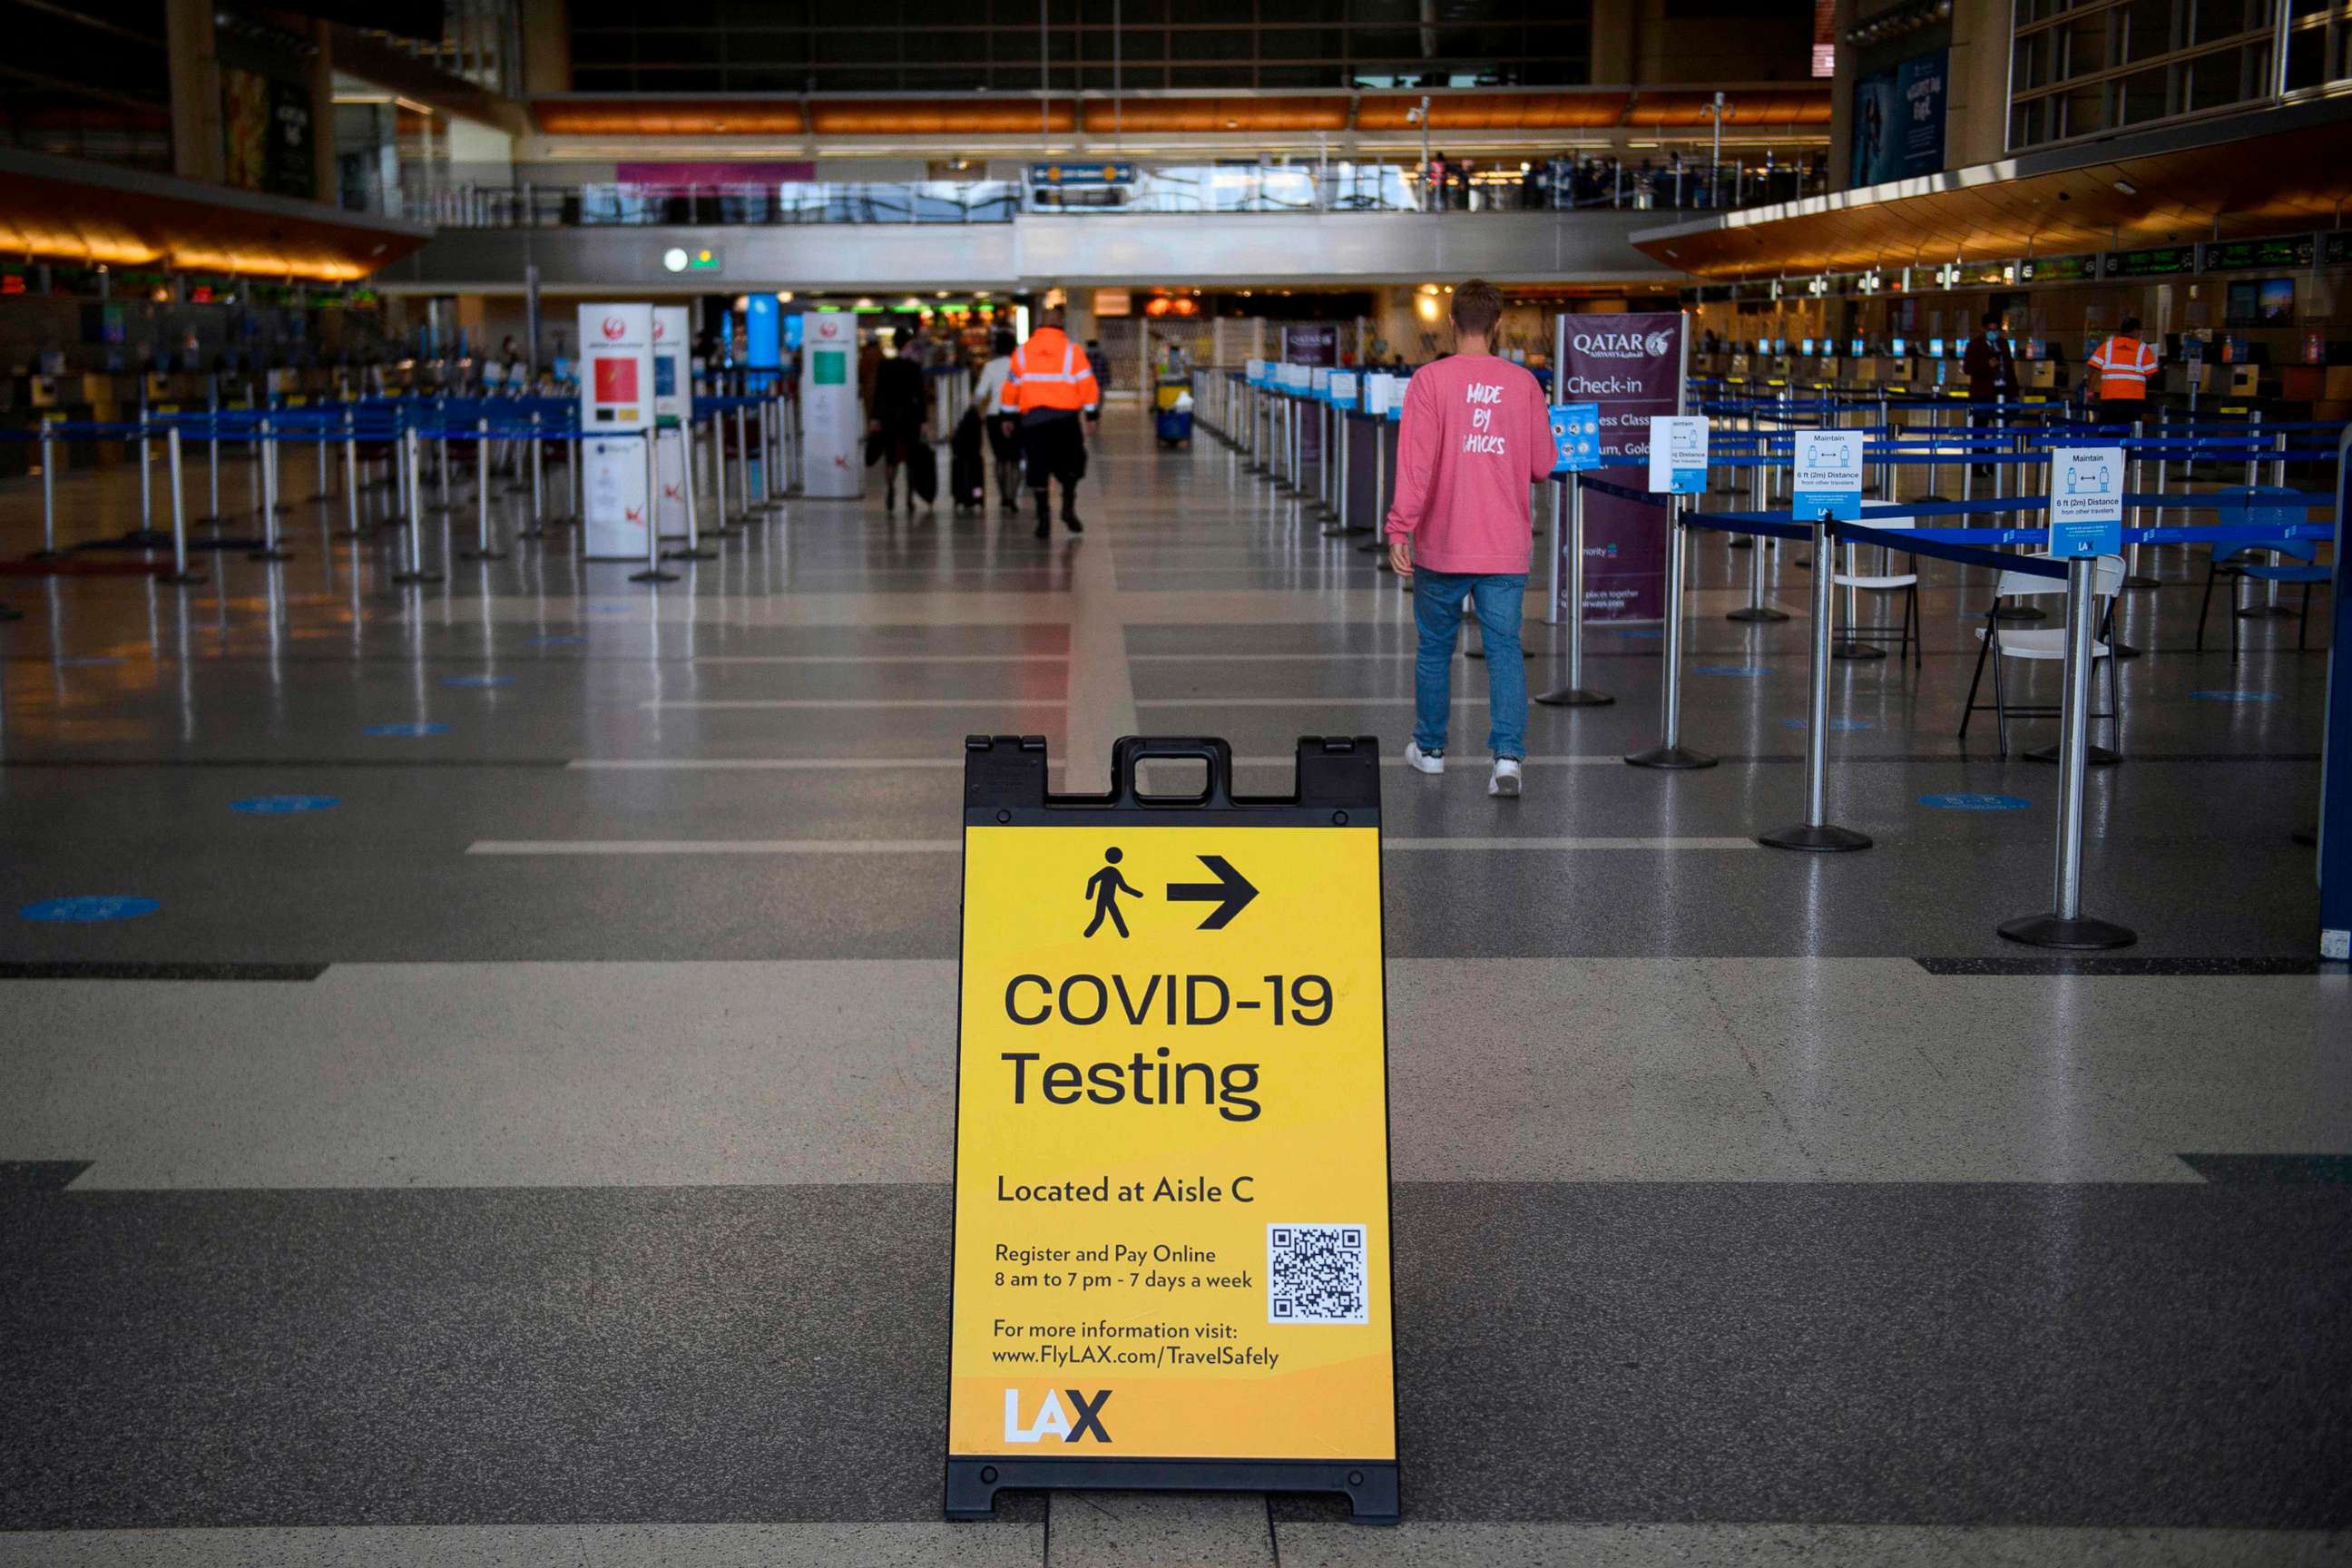 PHOTO: A sign directing people to Covid-19 testing is displayed by check-in counters at Los Angeles International Airport (LAX) amid increased Covid-19 travel restrictions, Jan. 25, 2021 in Los Angeles.